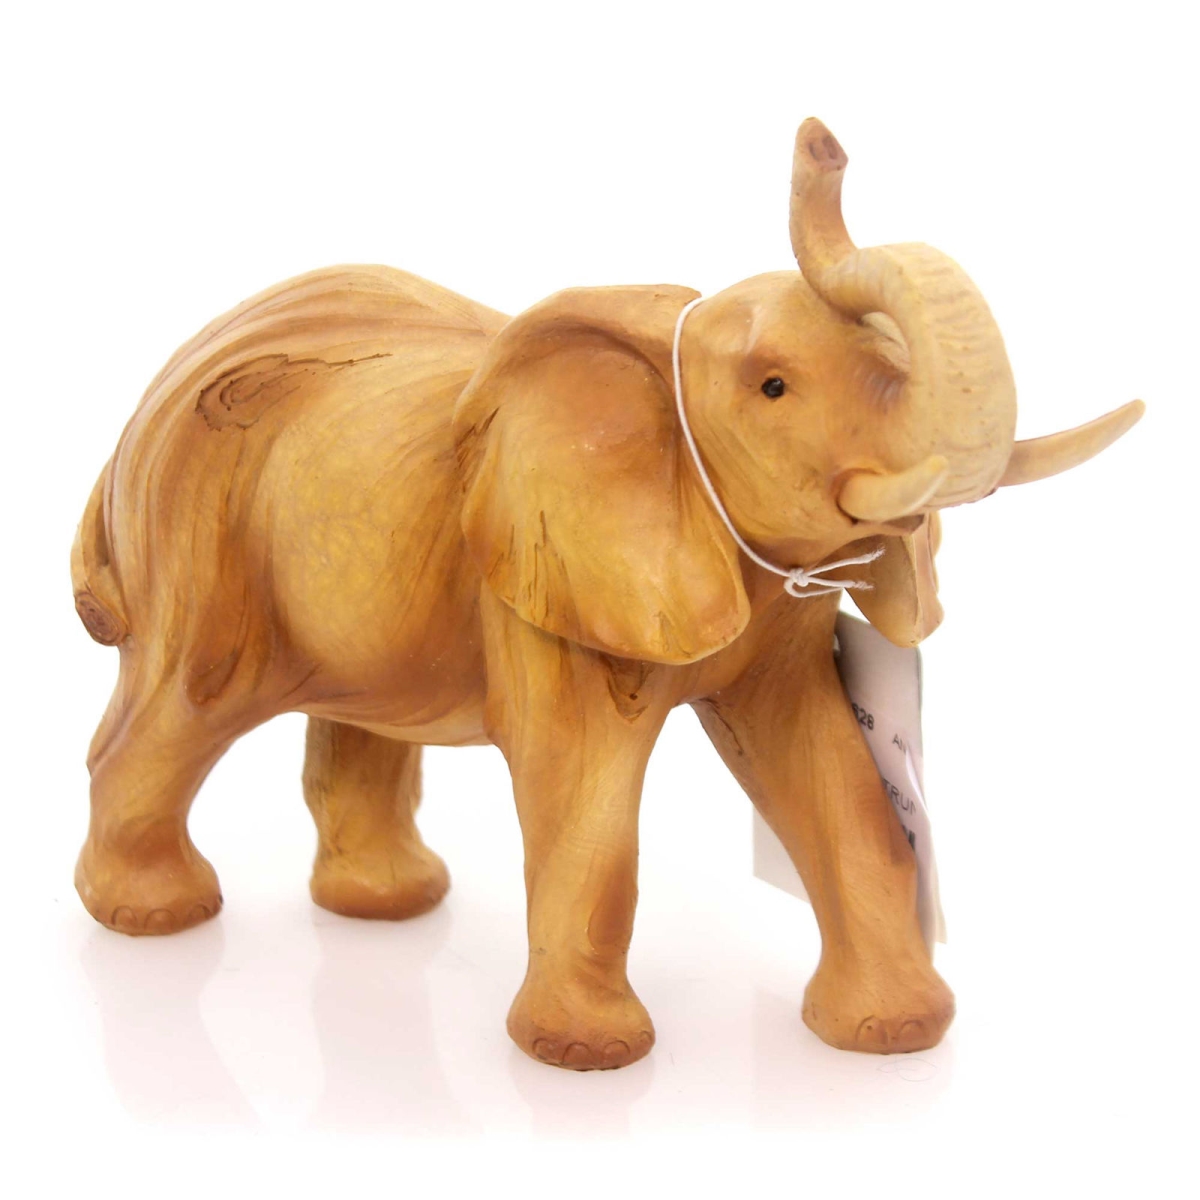 Mme-930 6 In. Woodlike Elephant With Trunk Up